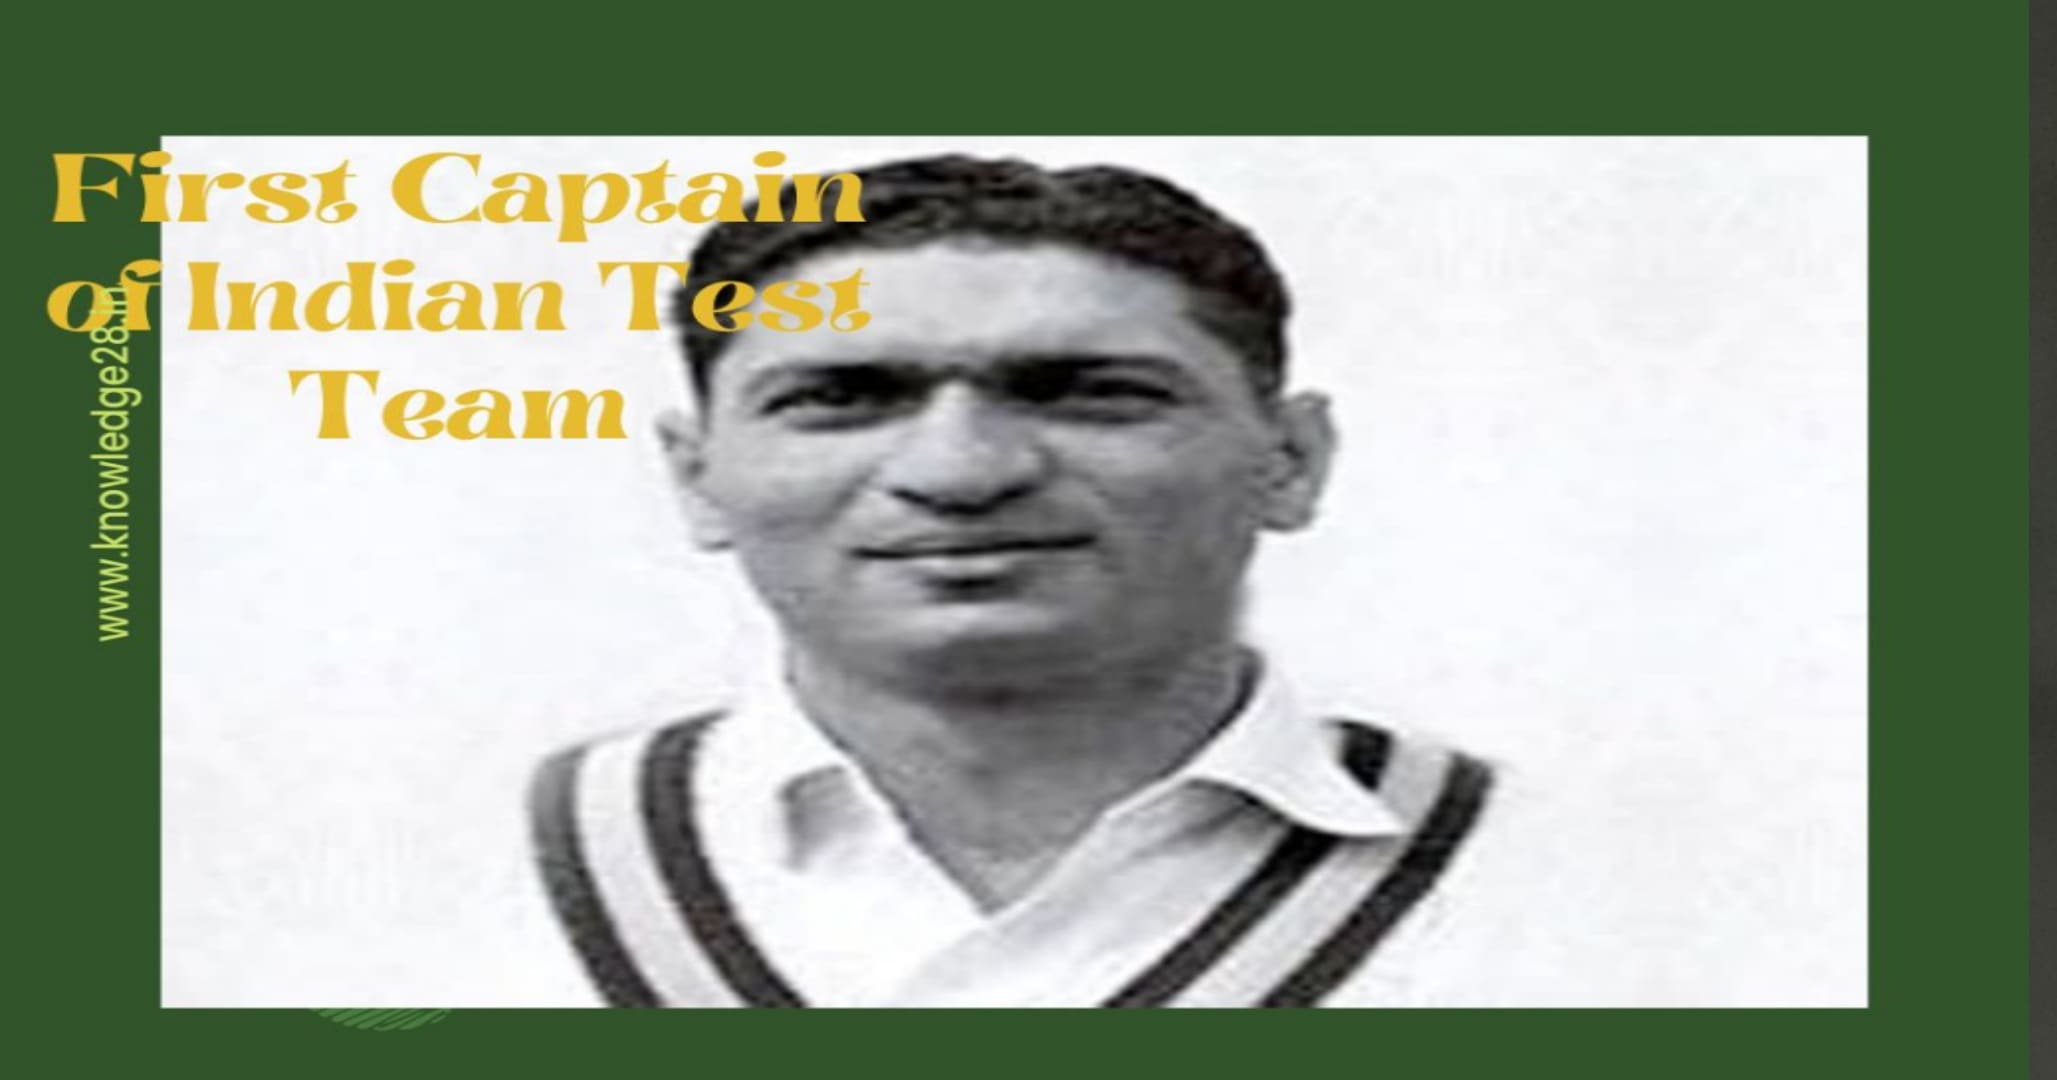 Who was the First Captain of Indian Test Team